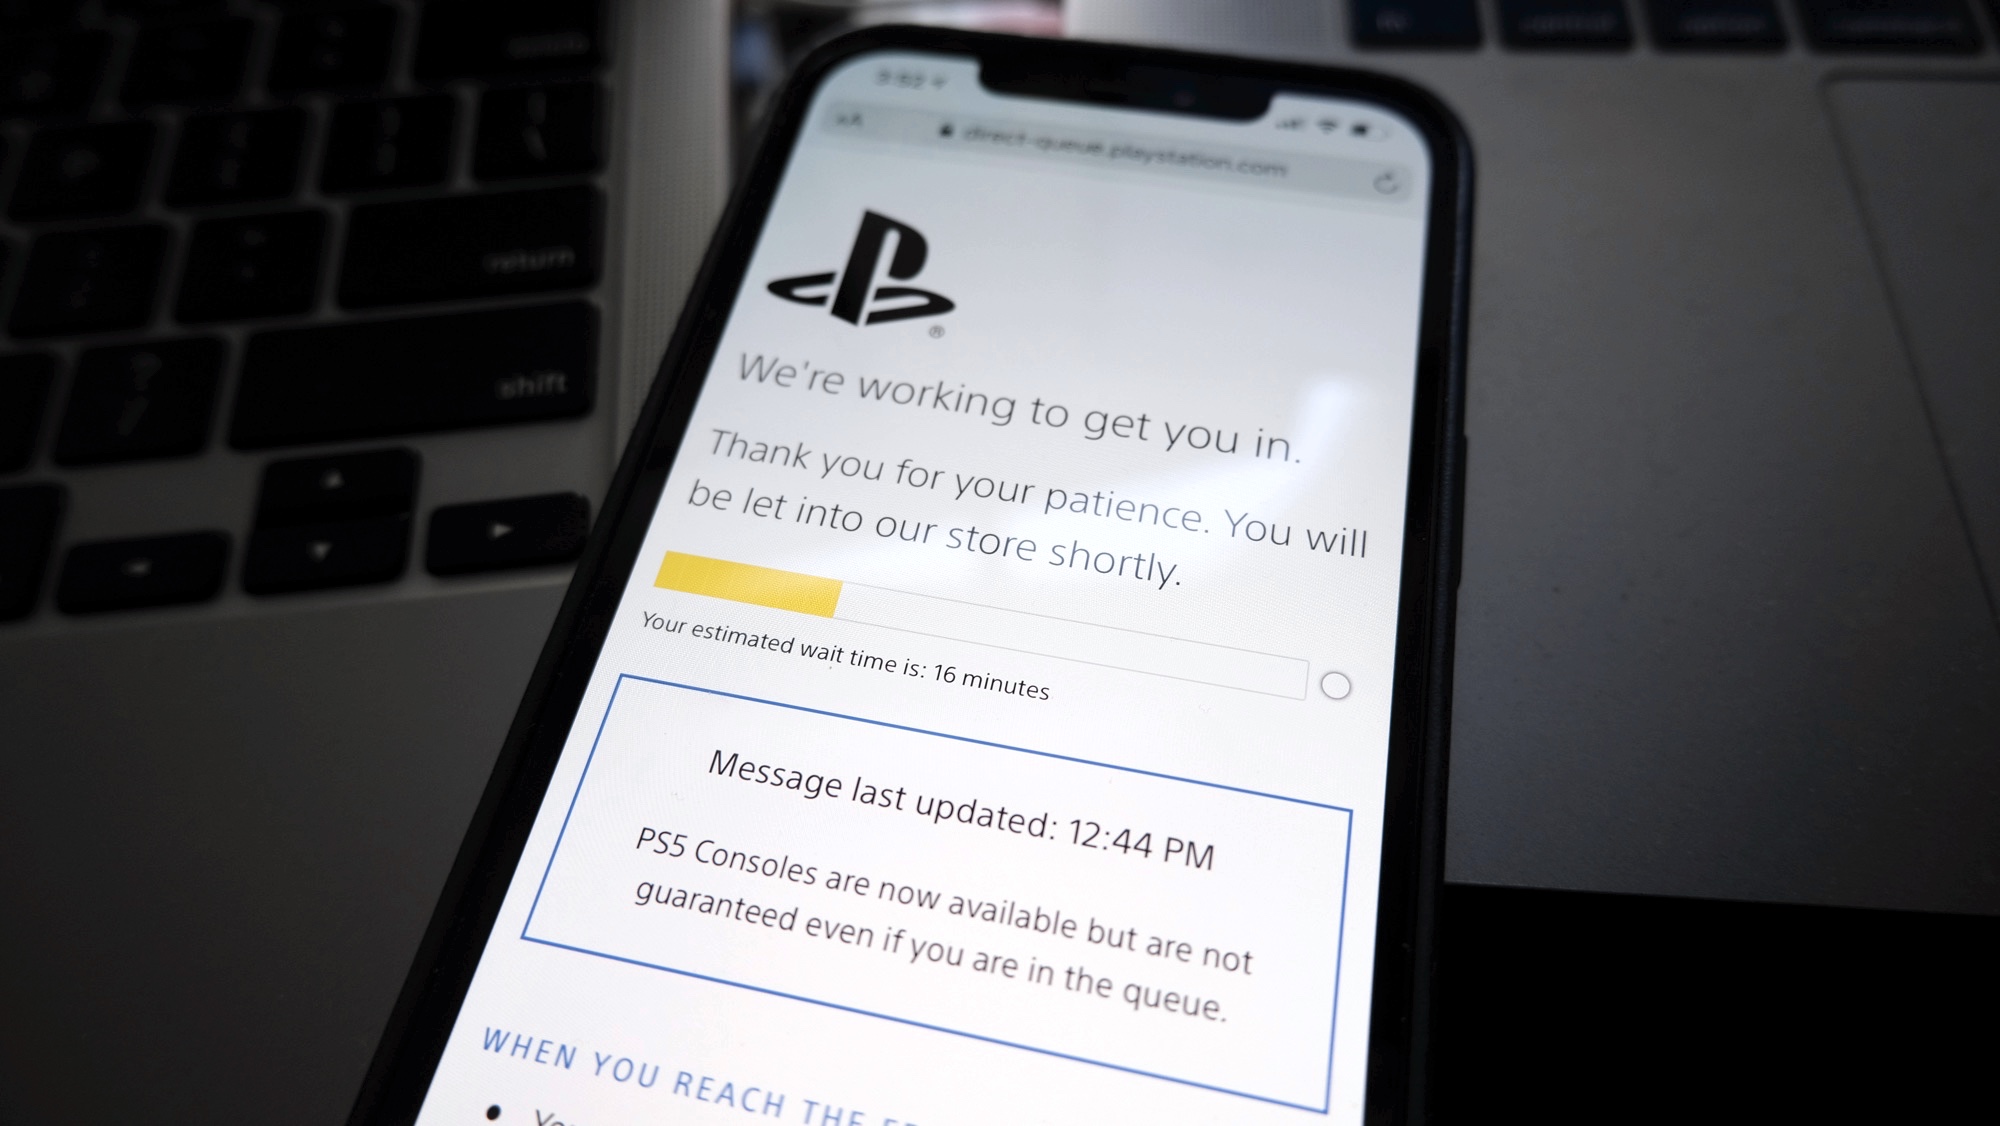 PS5 replenishment hunt at Sony Direct - this is what you want to see